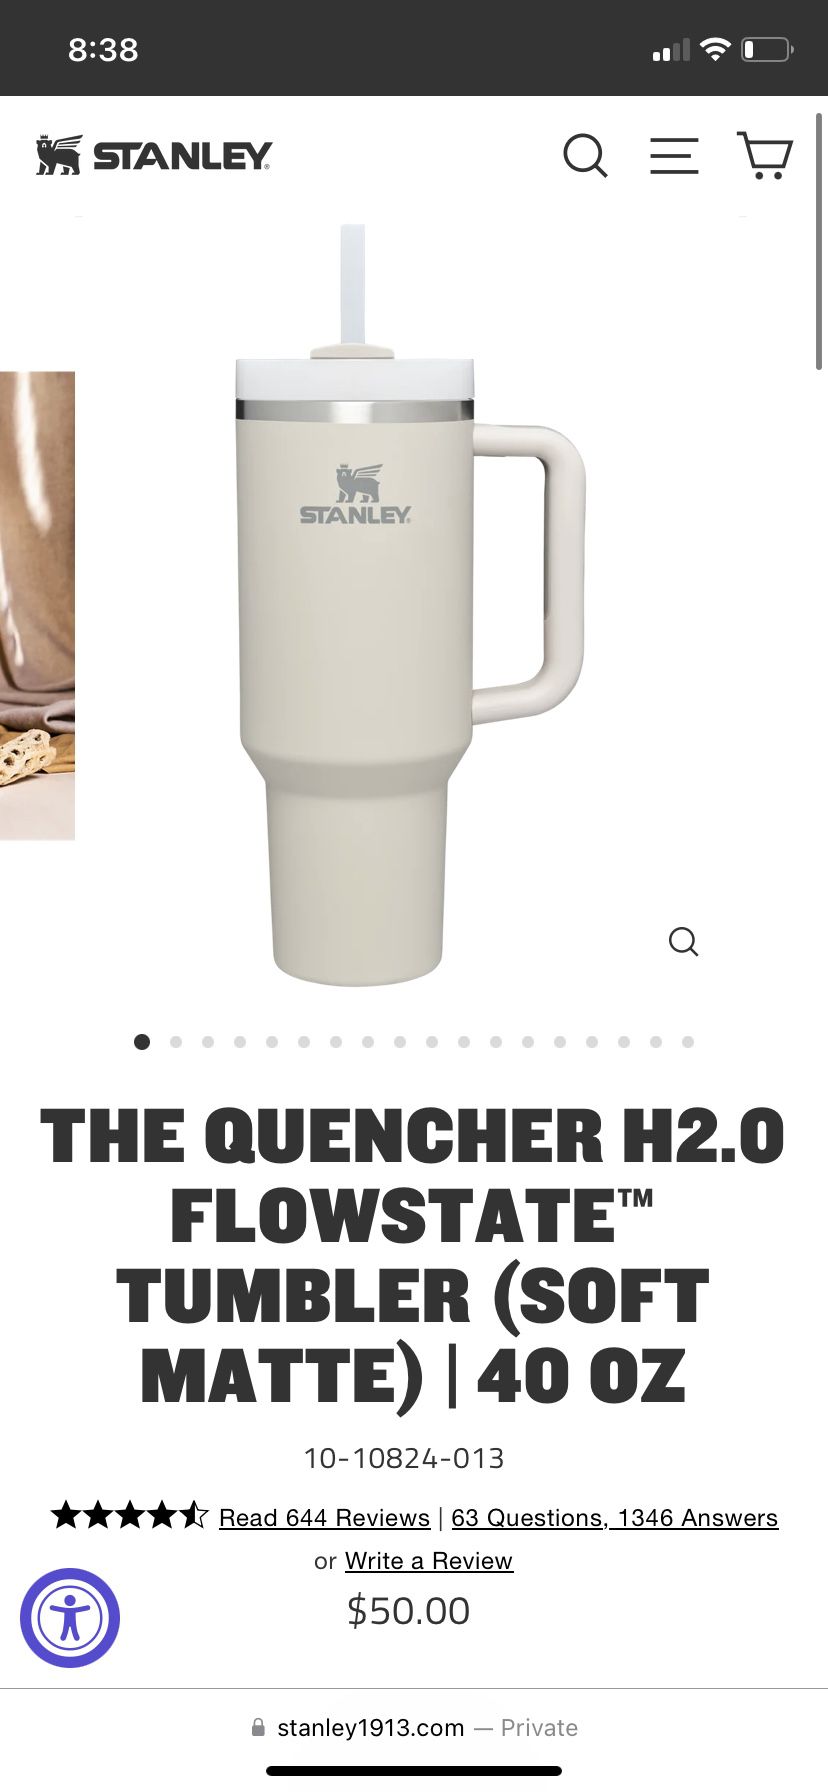 Stanley's Quencher H2.0 FlowState Tumbler Review